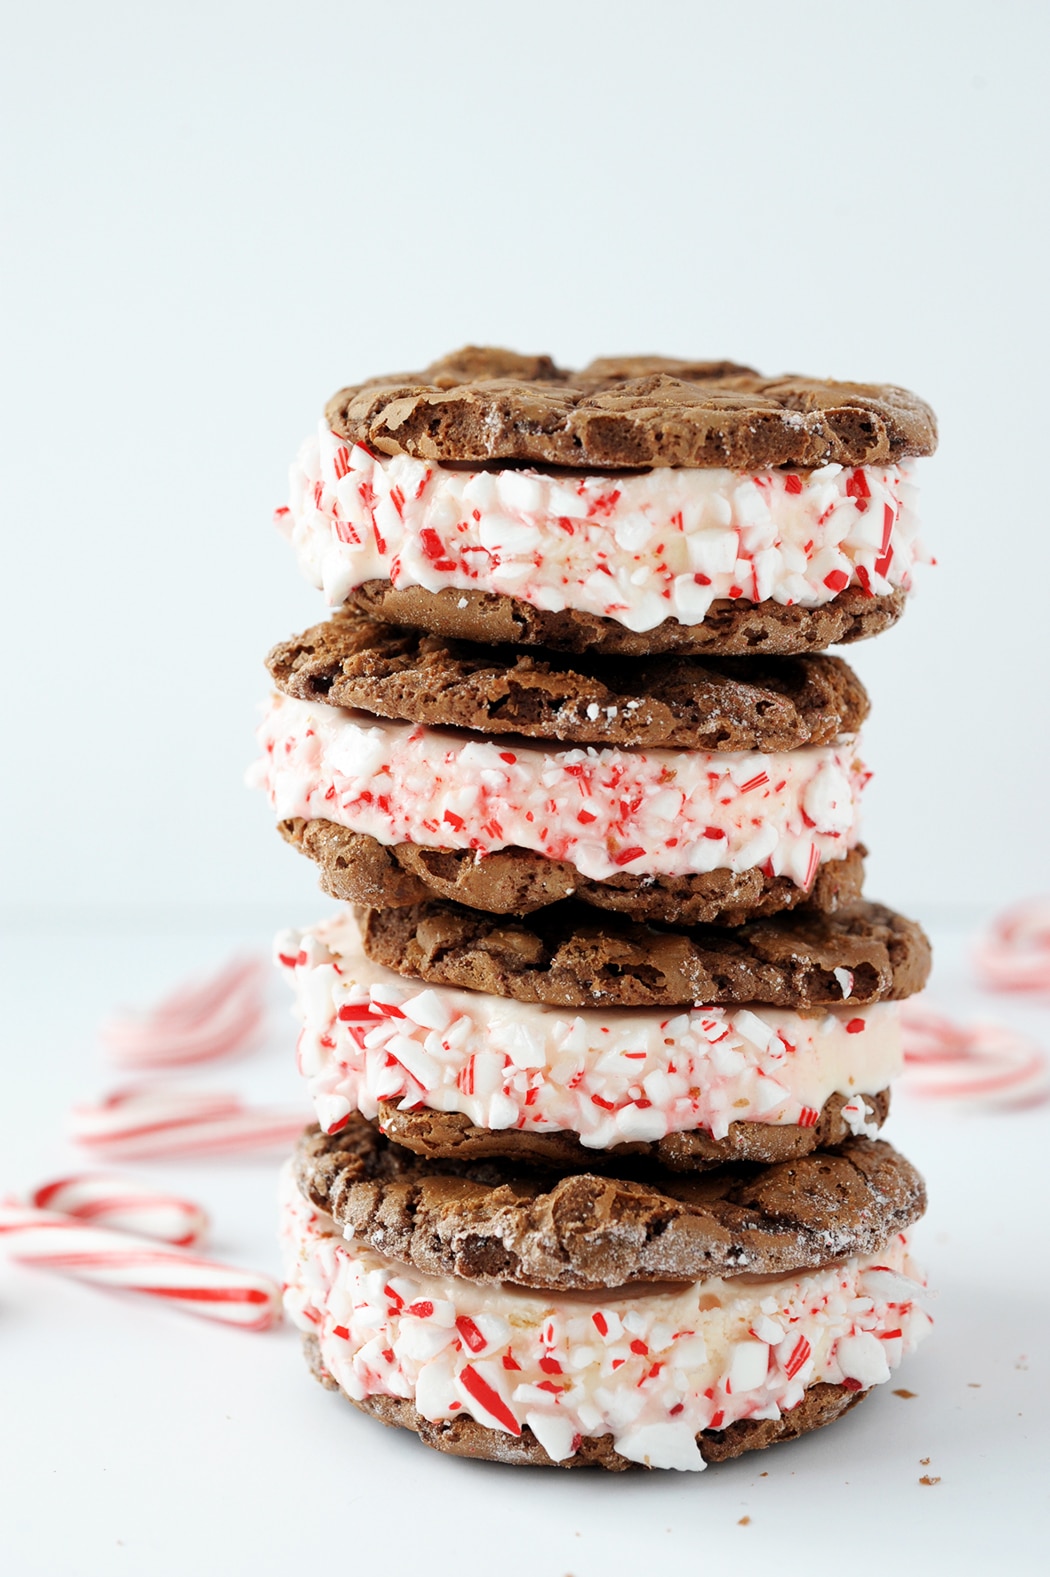 Chocolate and Peppermint Ice Cream Sandwich recipe – perfect for the holidays!